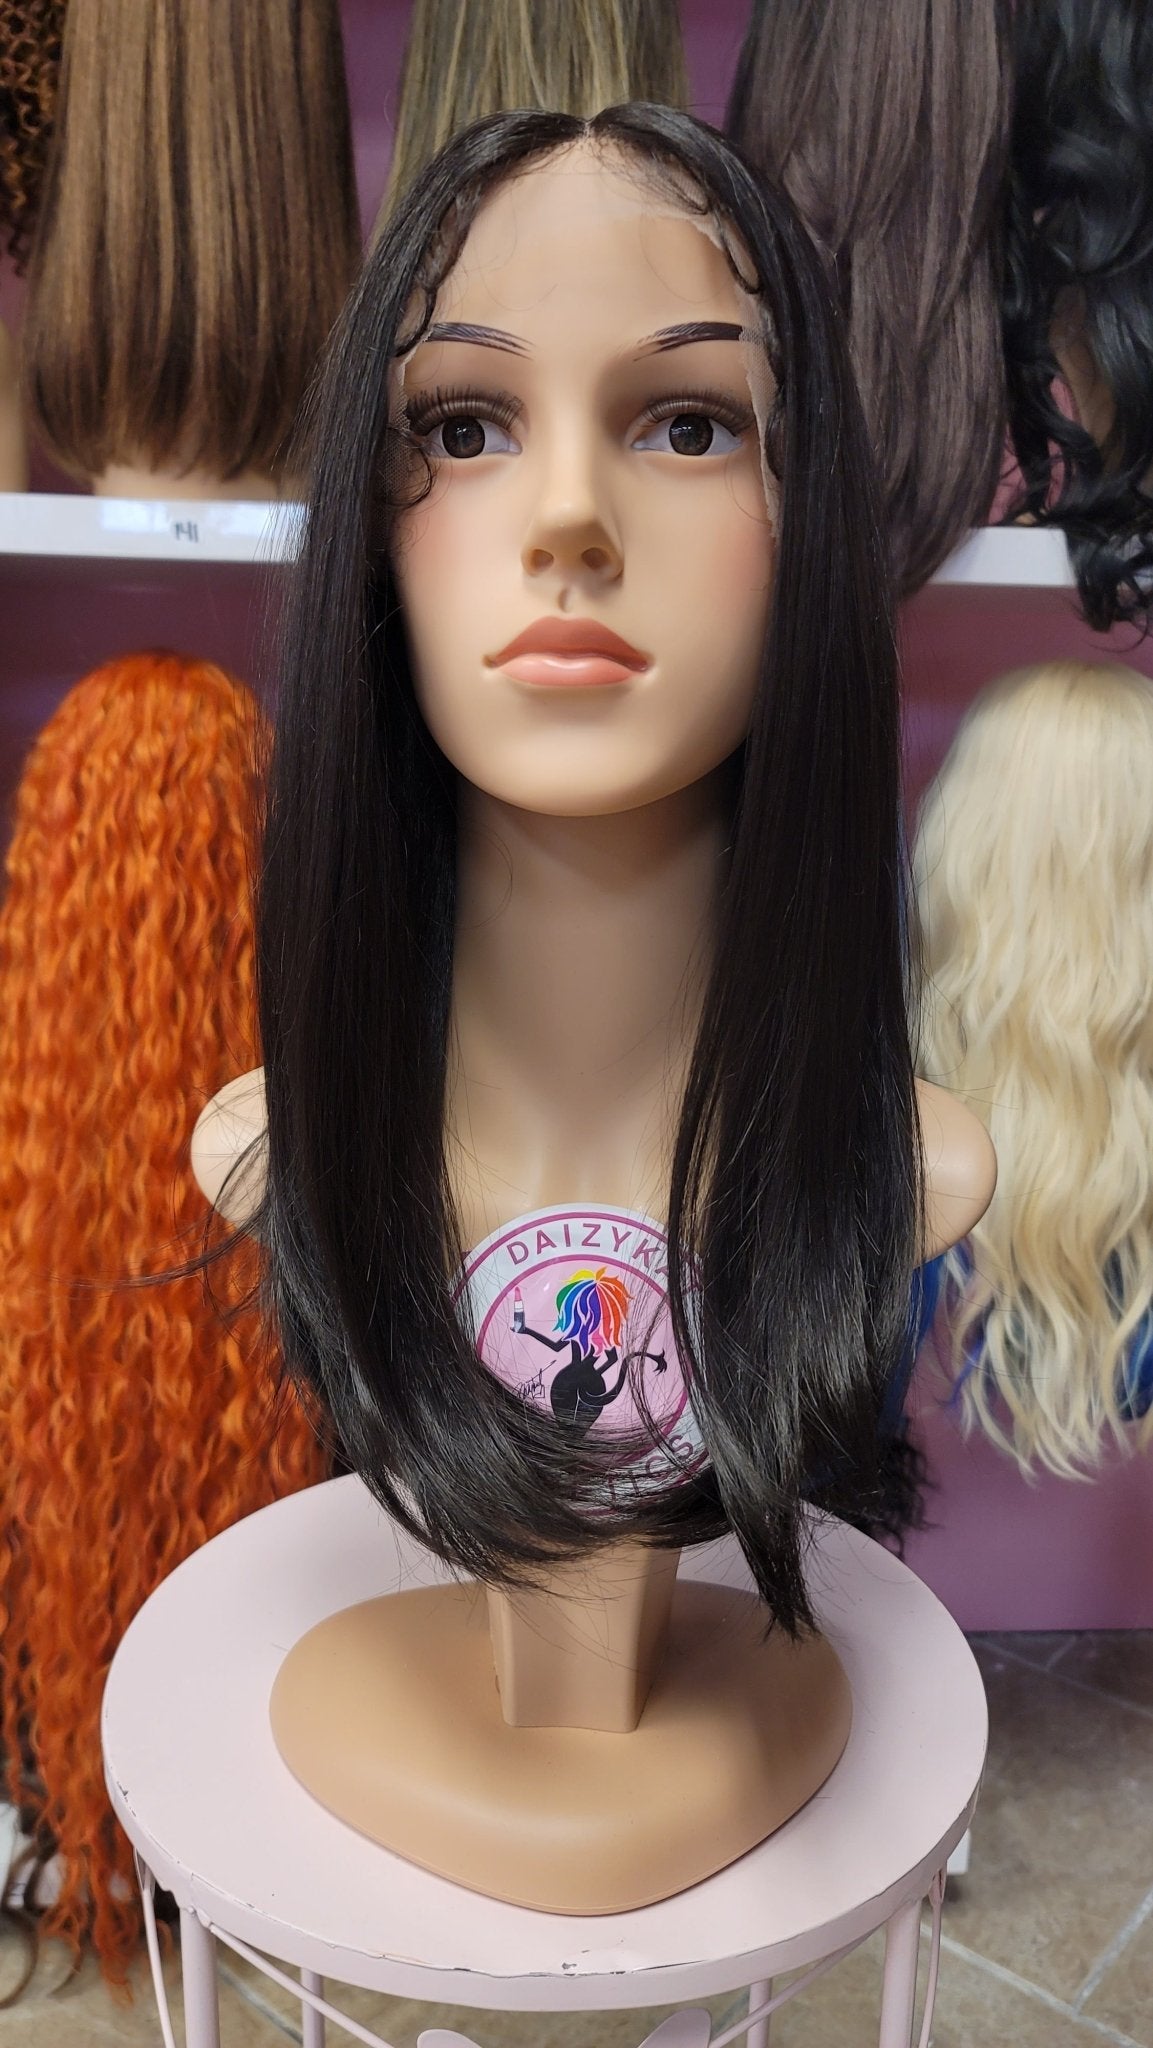 335 JANE - Middle Part Lace Front Wig - 2 - DaizyKat Cosmetics 335 JANE - Middle Part Lace Front Wig - 2 DaizyKat Cosmetics Wigs